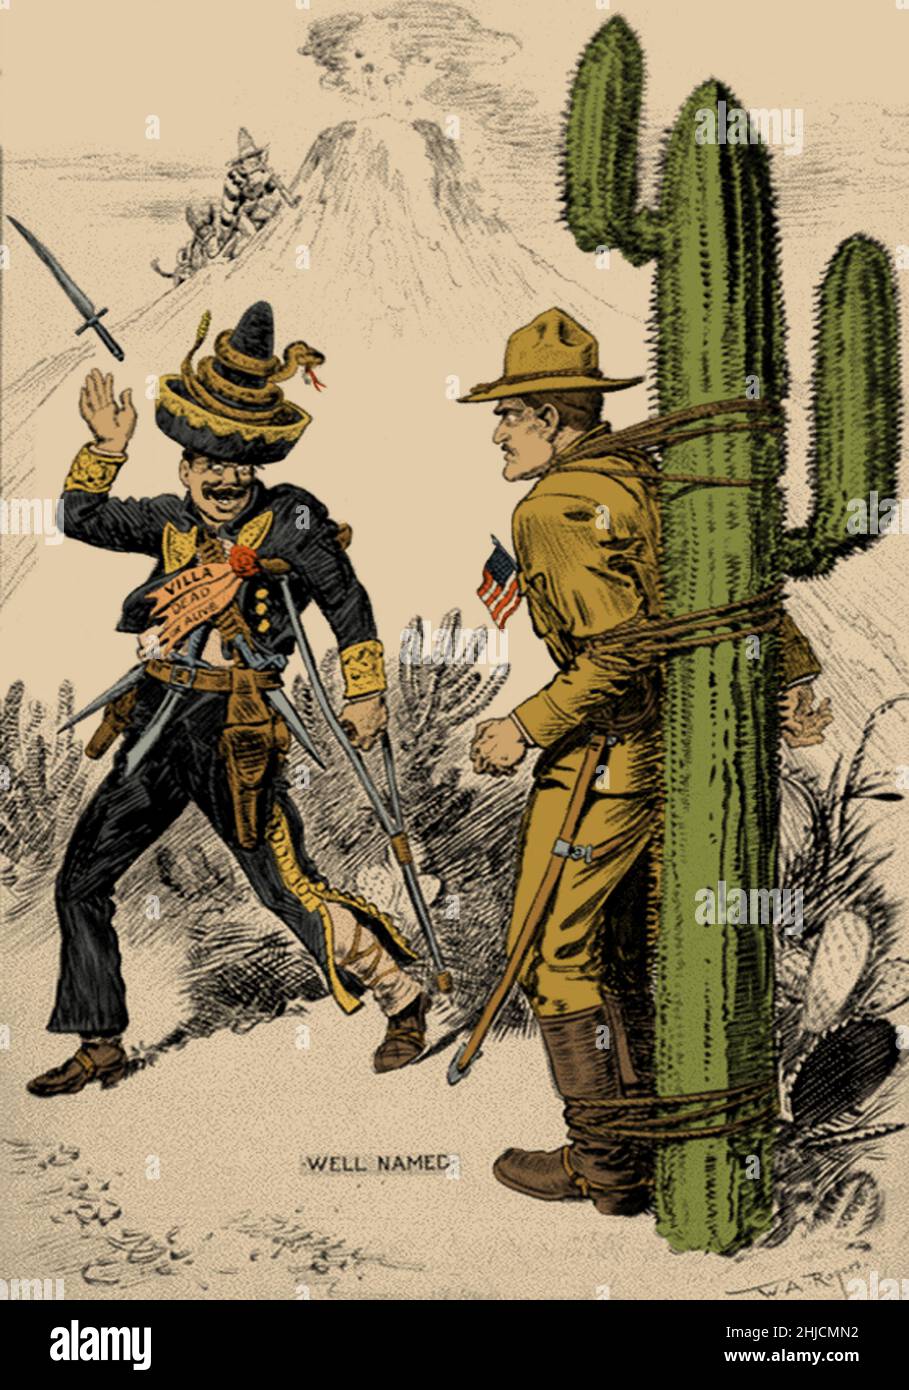 Pancho Villa, dressed in Mexican attire, looking at John Pershing tied to a cactus, with volcano in background. The Pancho Villa Expedition was a military operation conducted by the US Army against the forces of Mexican revolutionary Pancho Villa from March 1916 - February 1917, during the Mexican Revolution of 1910-20.  William Allen Rogers, New York Herald, November 26, 1916 (color-enhanced). Stock Photo